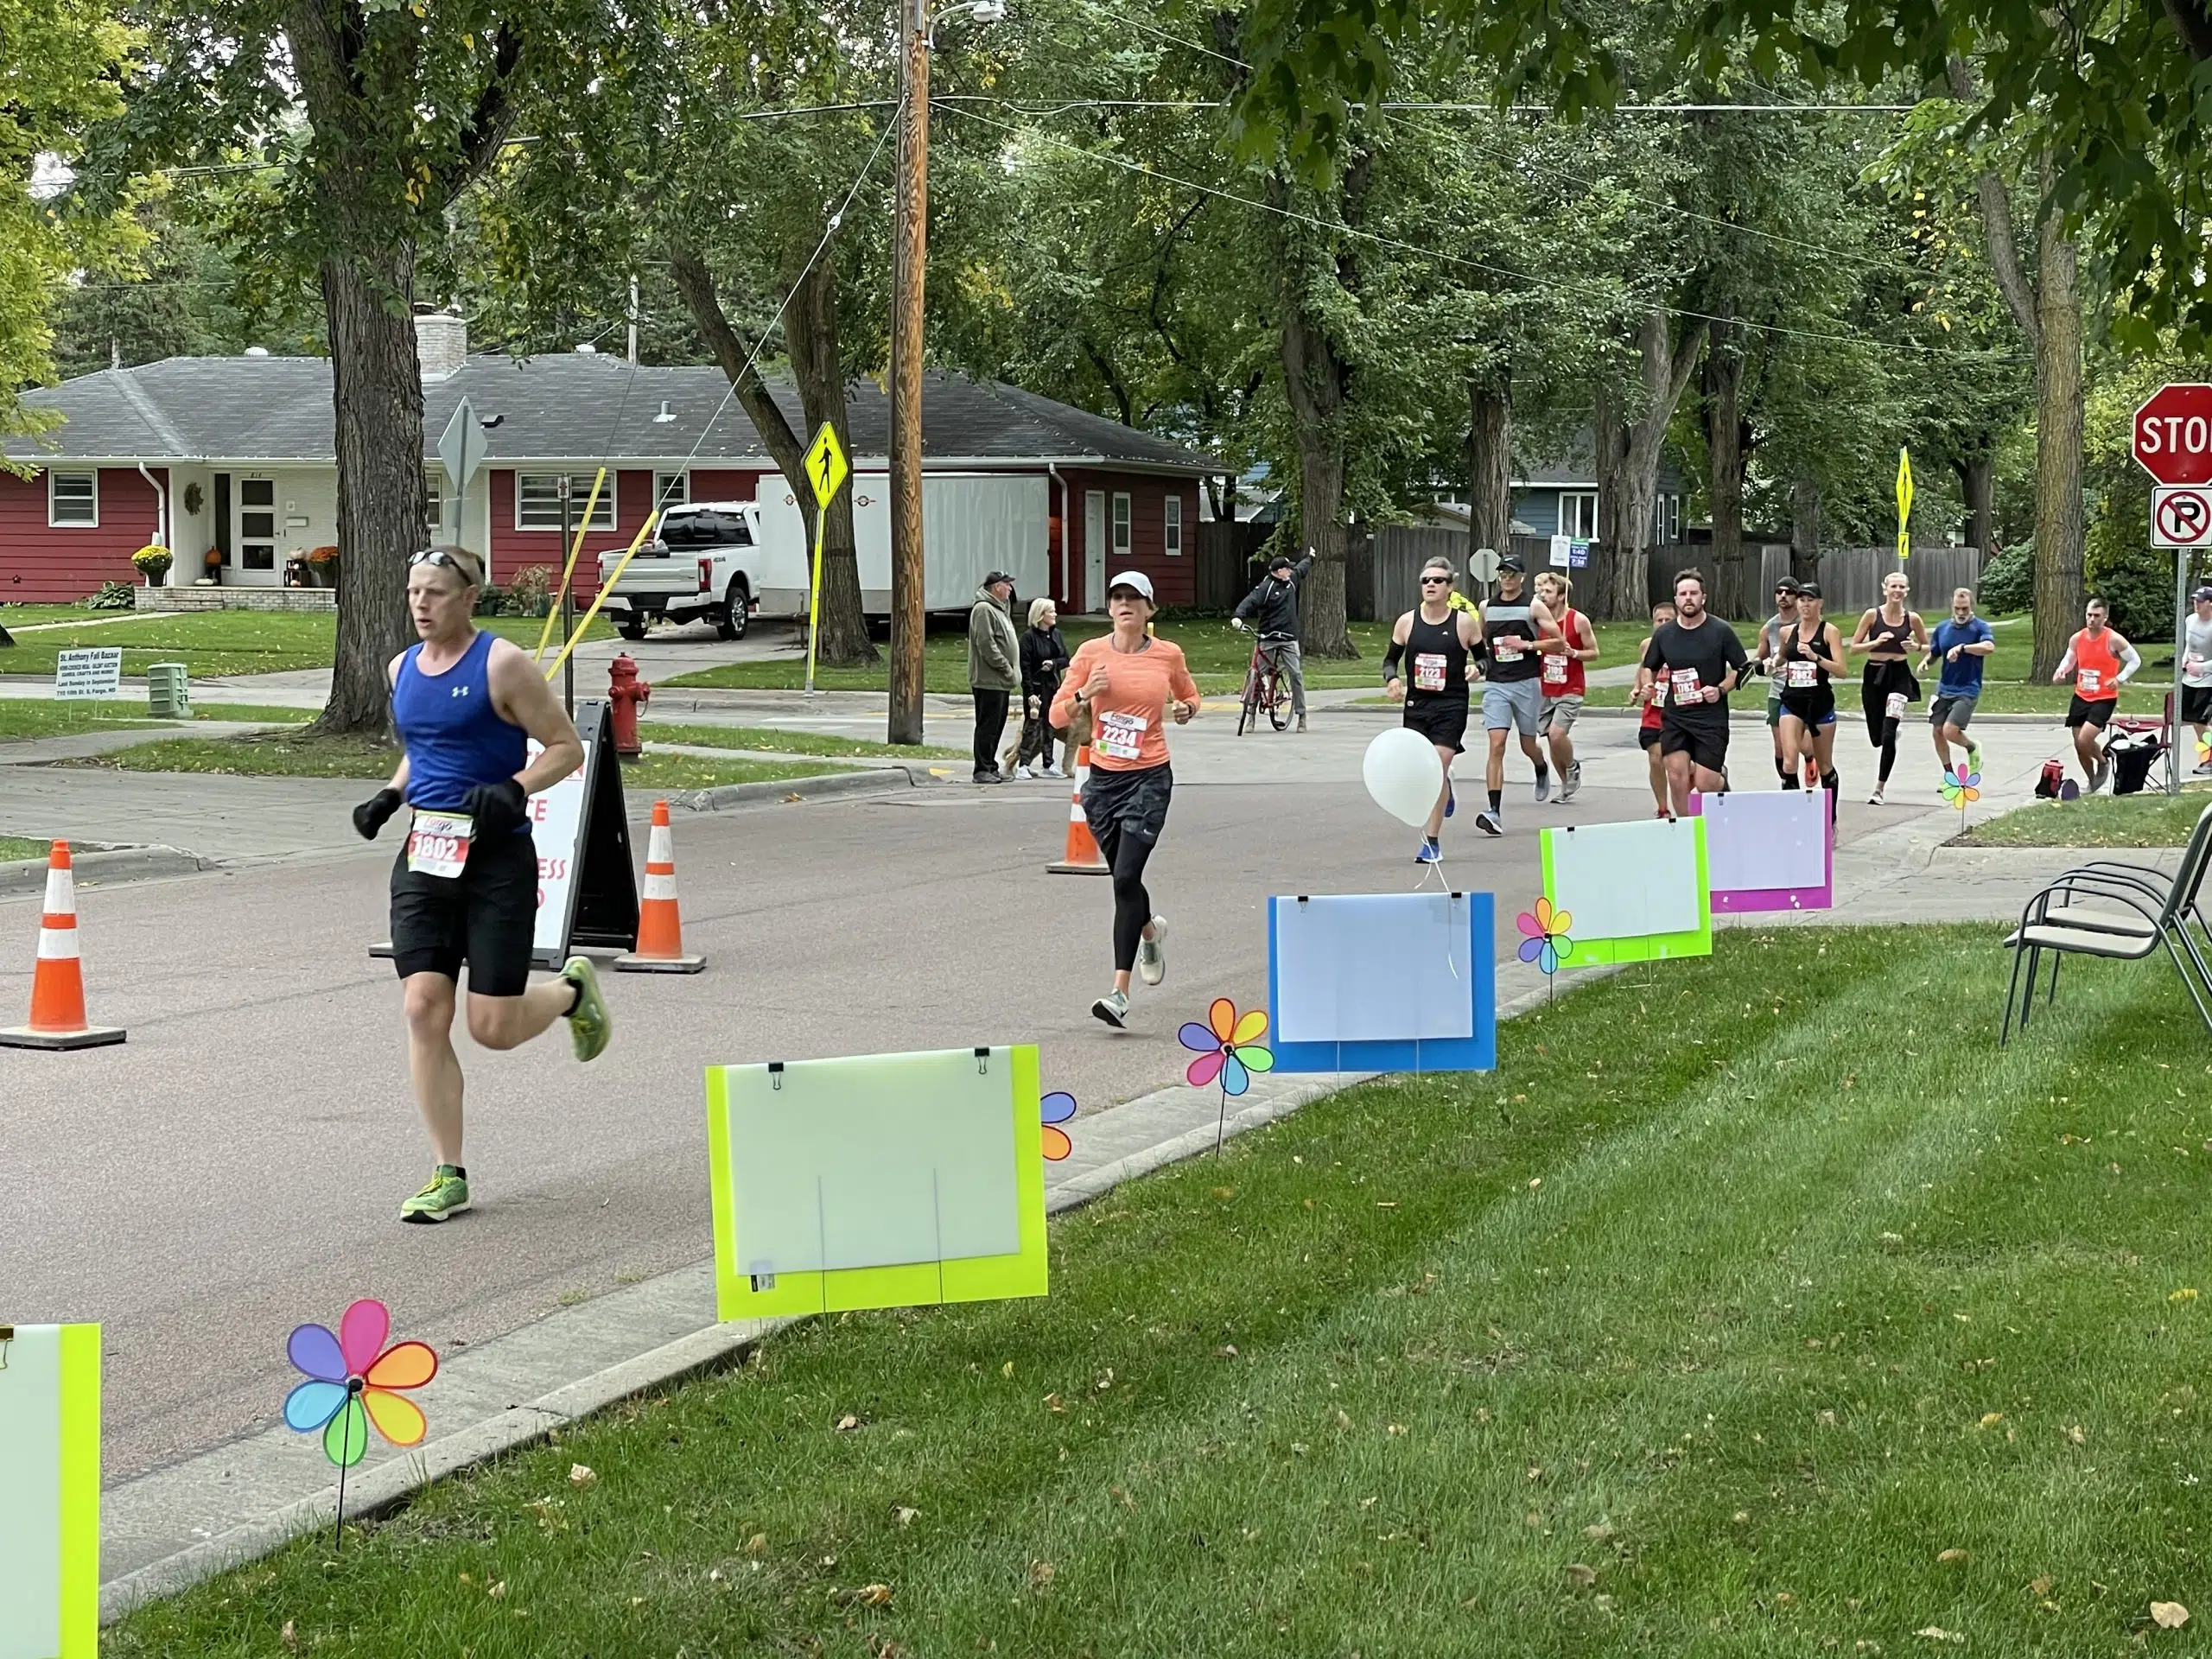 Fargo Marathon back runners after last year cancellation The